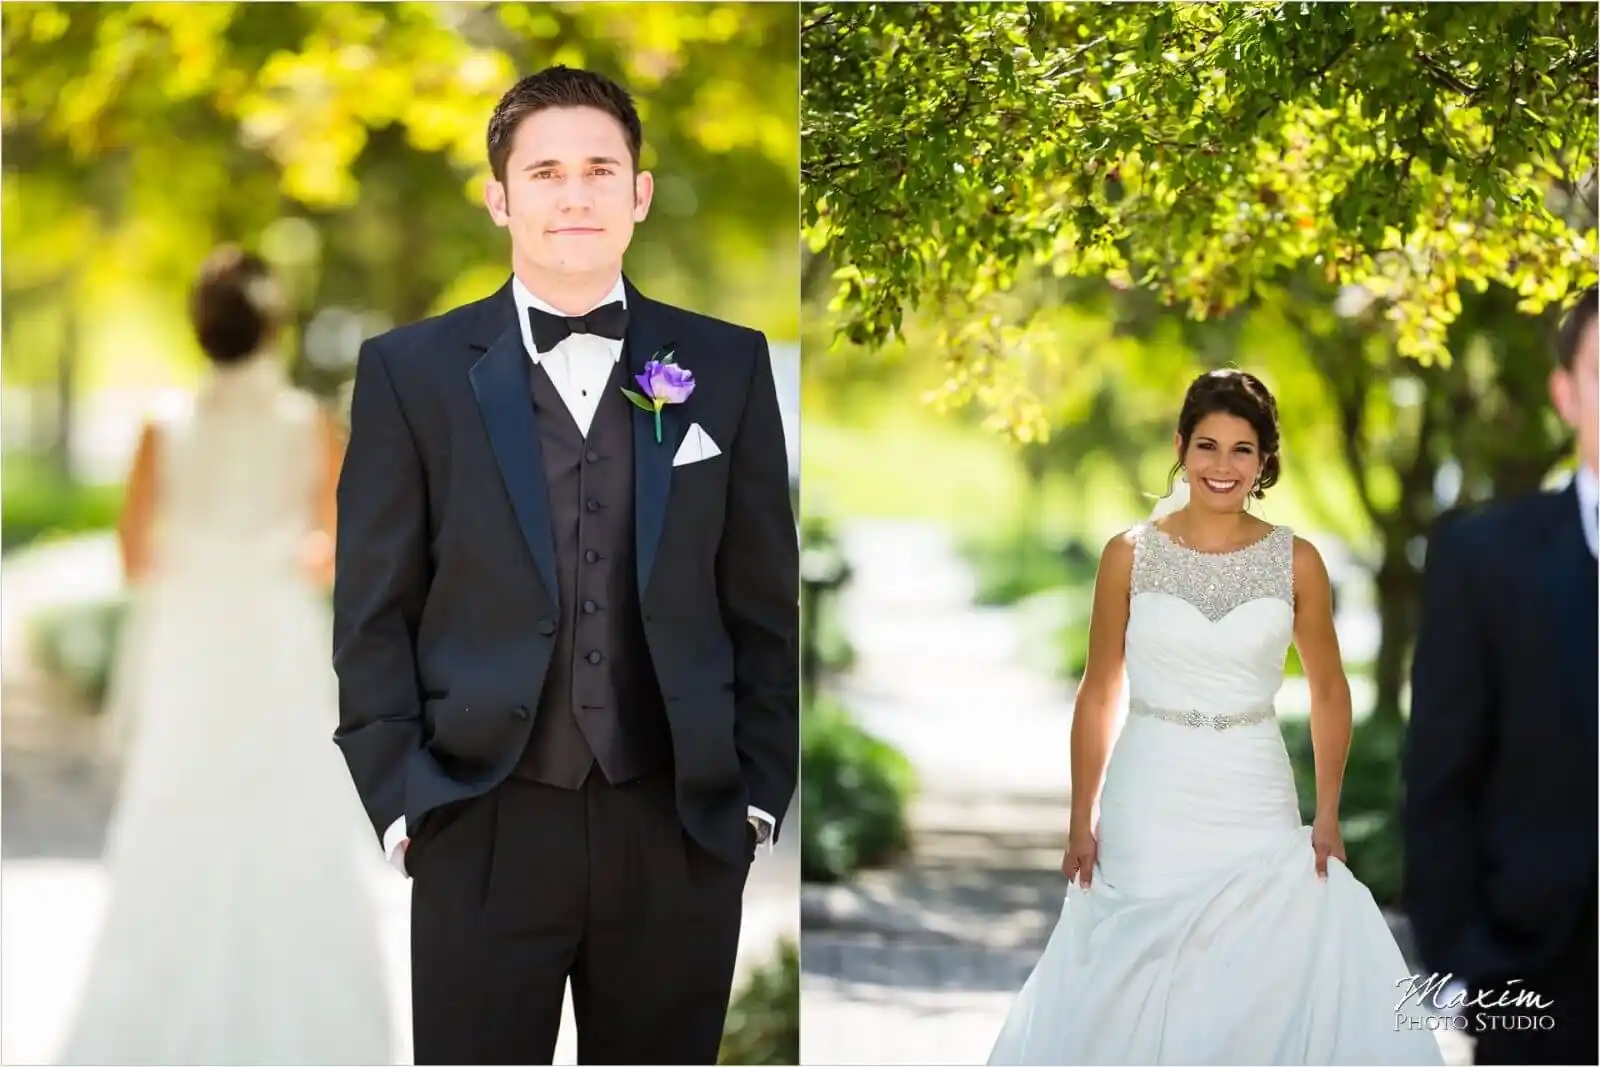 Dayton Wedding Photographers, Country Club of the North Wedding first look reveal